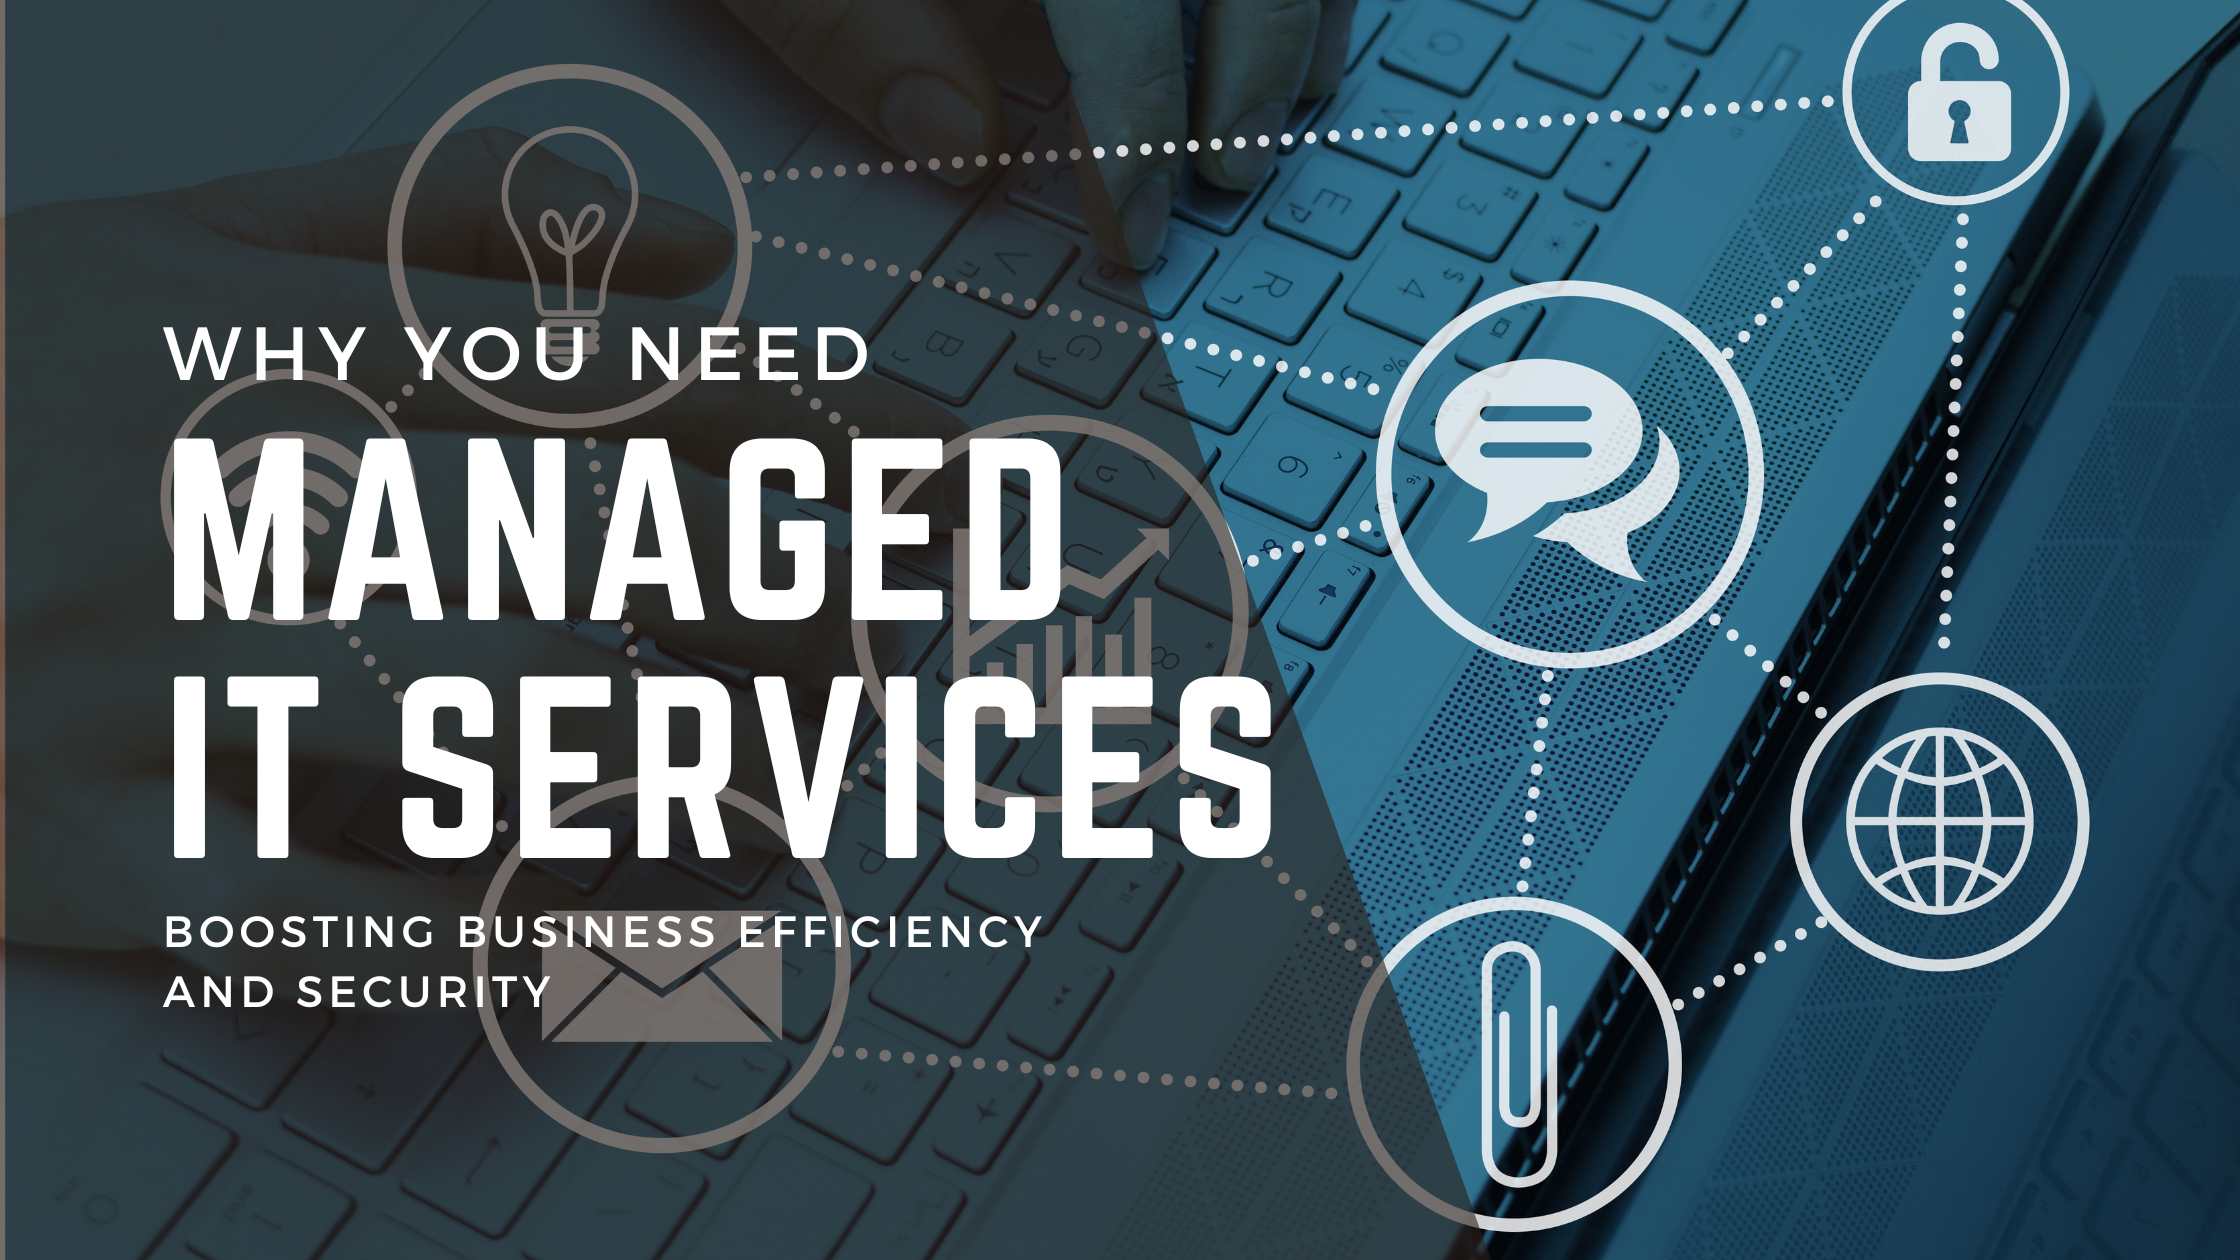 Why You Need Managed IT Services: Boosting Business Efficiency and Security